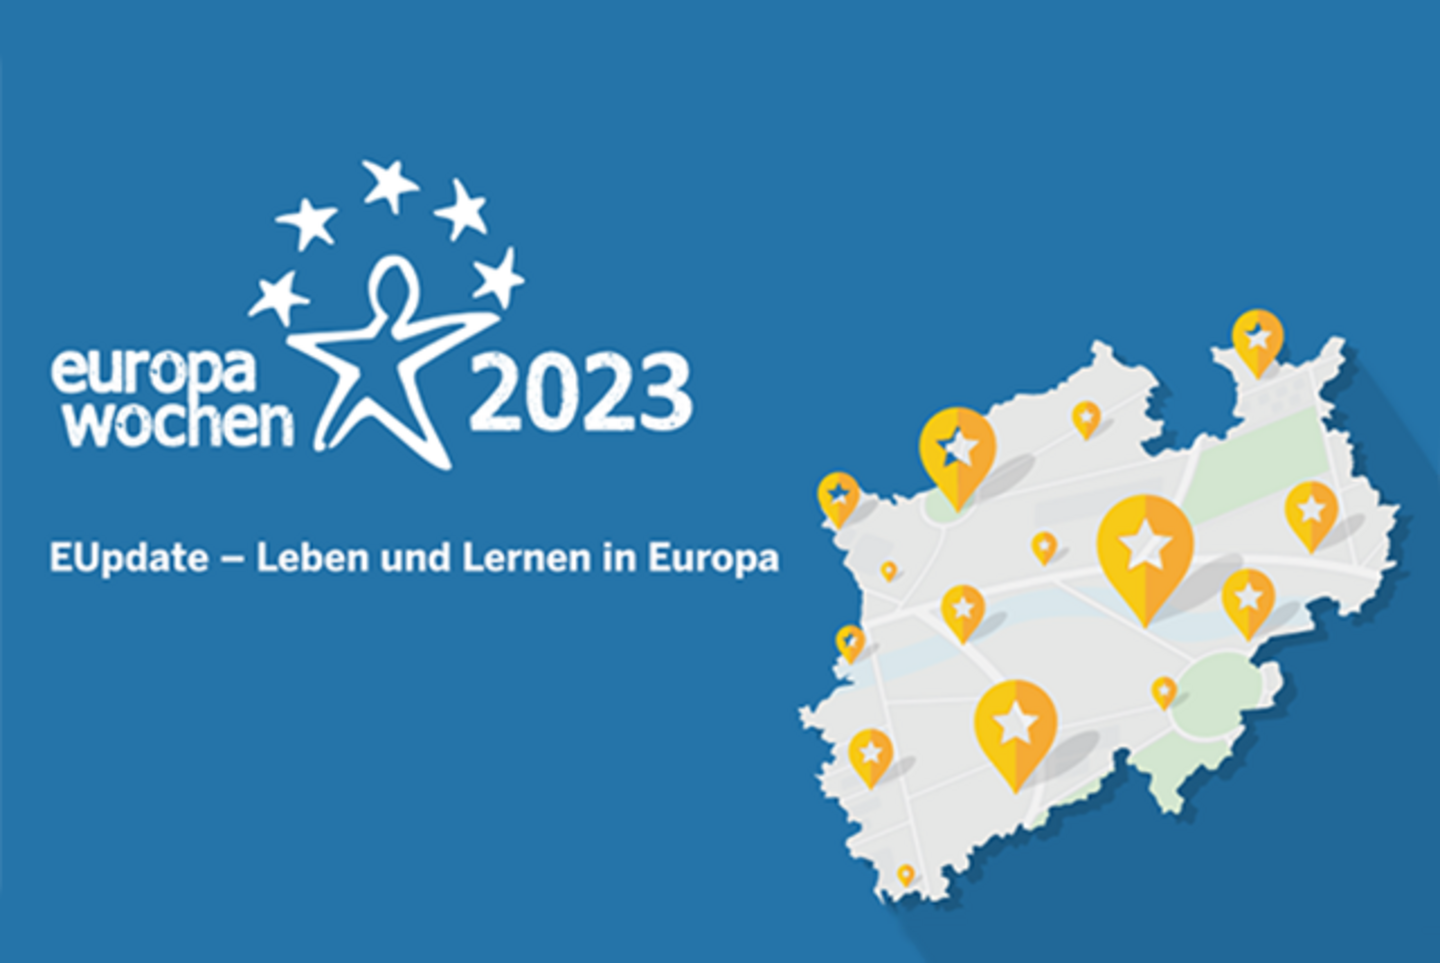 Logo and text in German: Europawochen 2023. EUpdate – Leben und Lernen in Europa. Graphic: Section of a map with position markers.